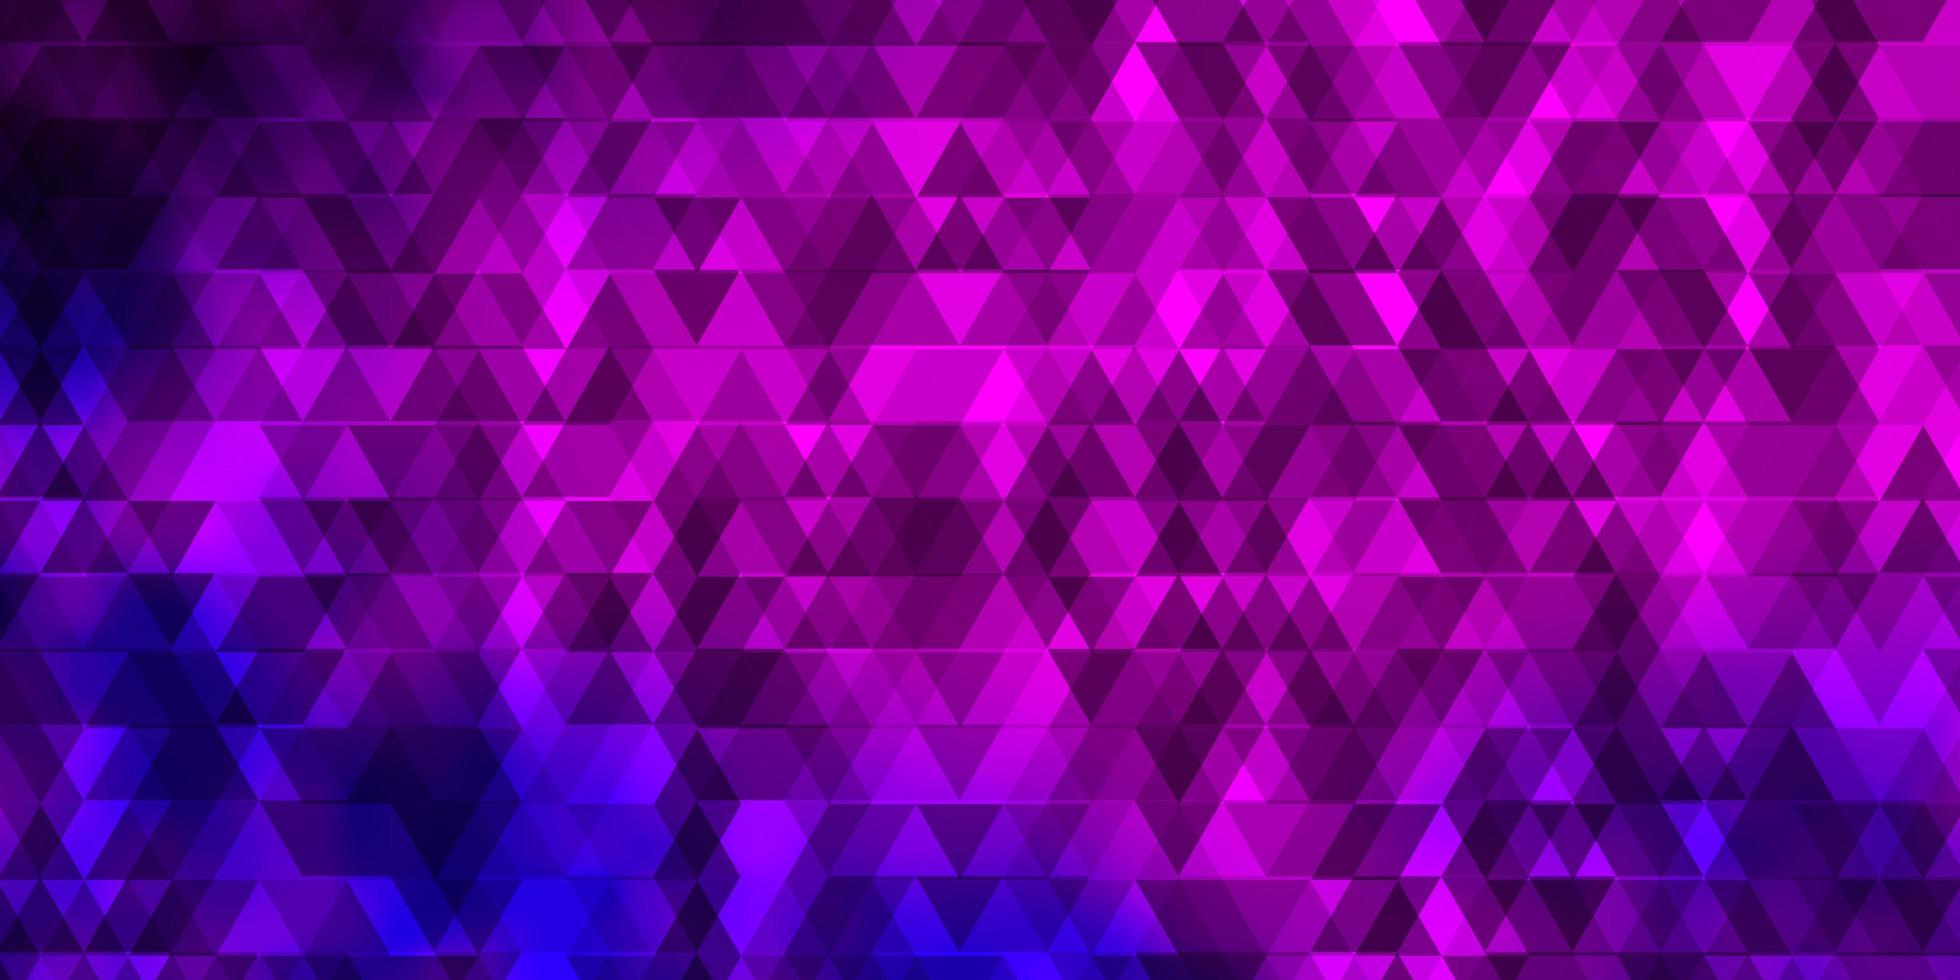 Light Pink, Blue vector background with lines, triangles.